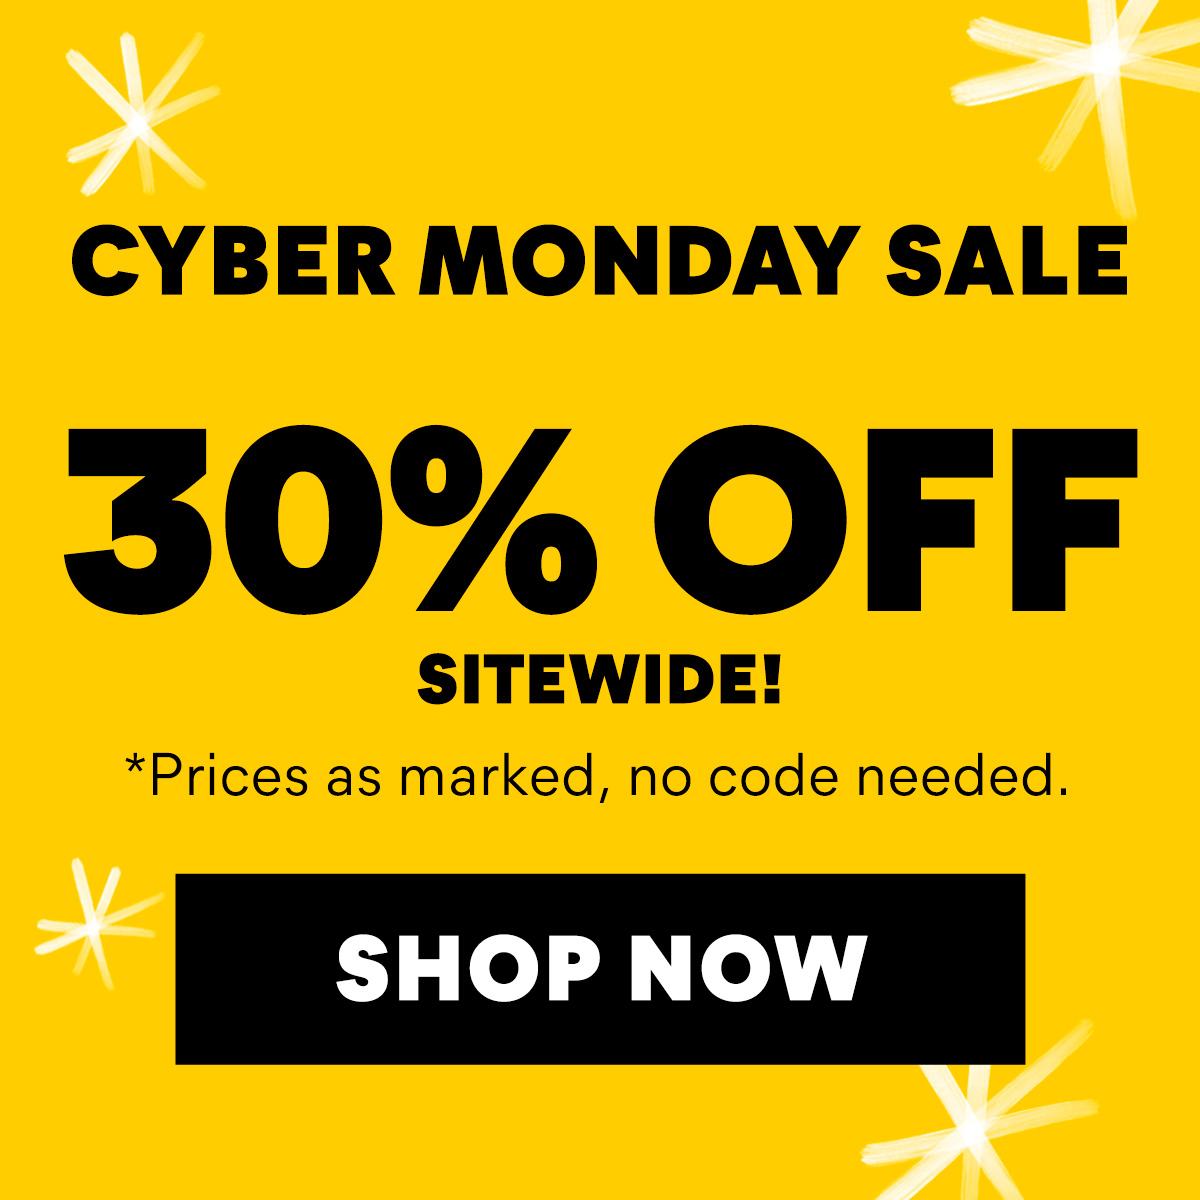 Cyber Monday Sale. 30% off sitewide! No code needed. Prices as marked.